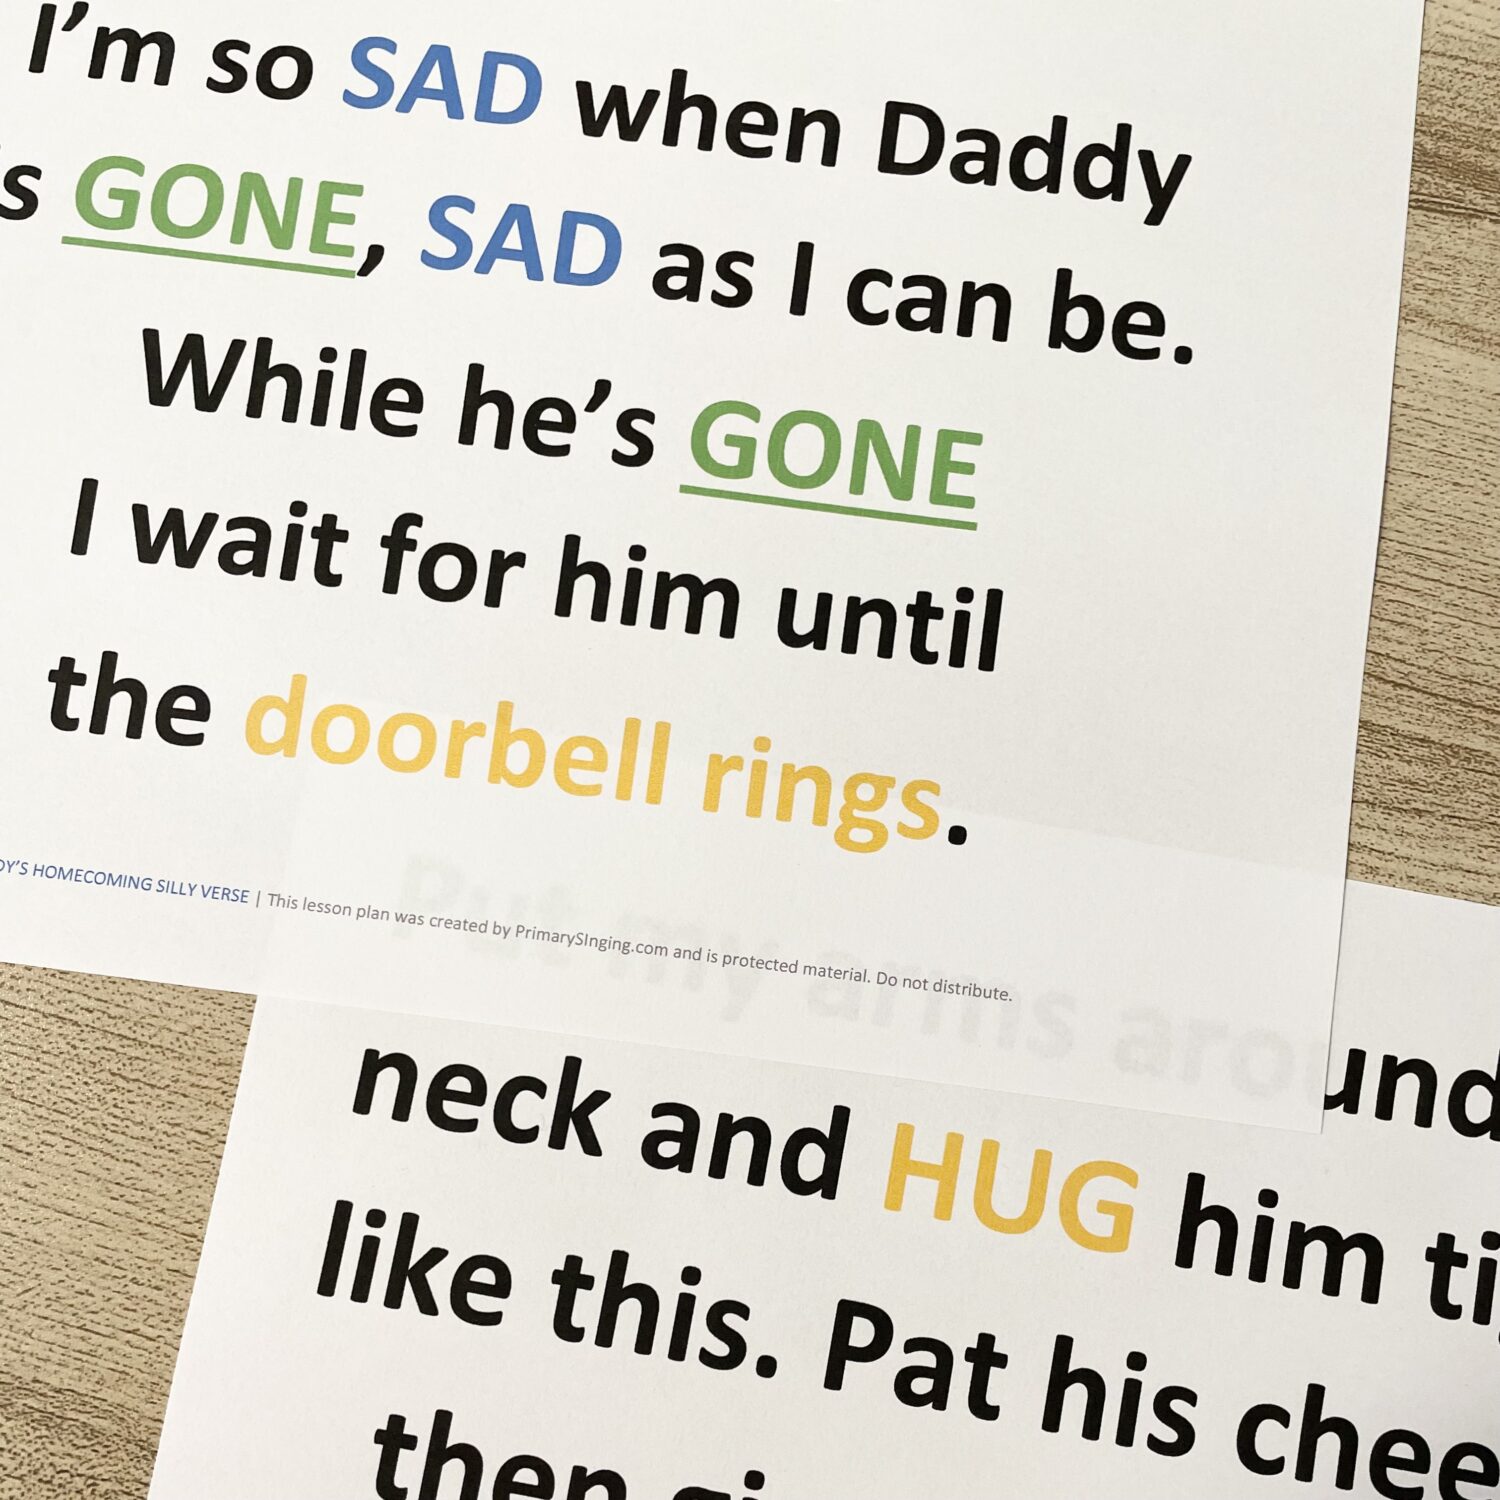 Daddy's Homecoming Silly Verse! Change the lyrics to this Father's Day song with these silly verses with 4 free printable verses for LDS Primary Music Leaders.